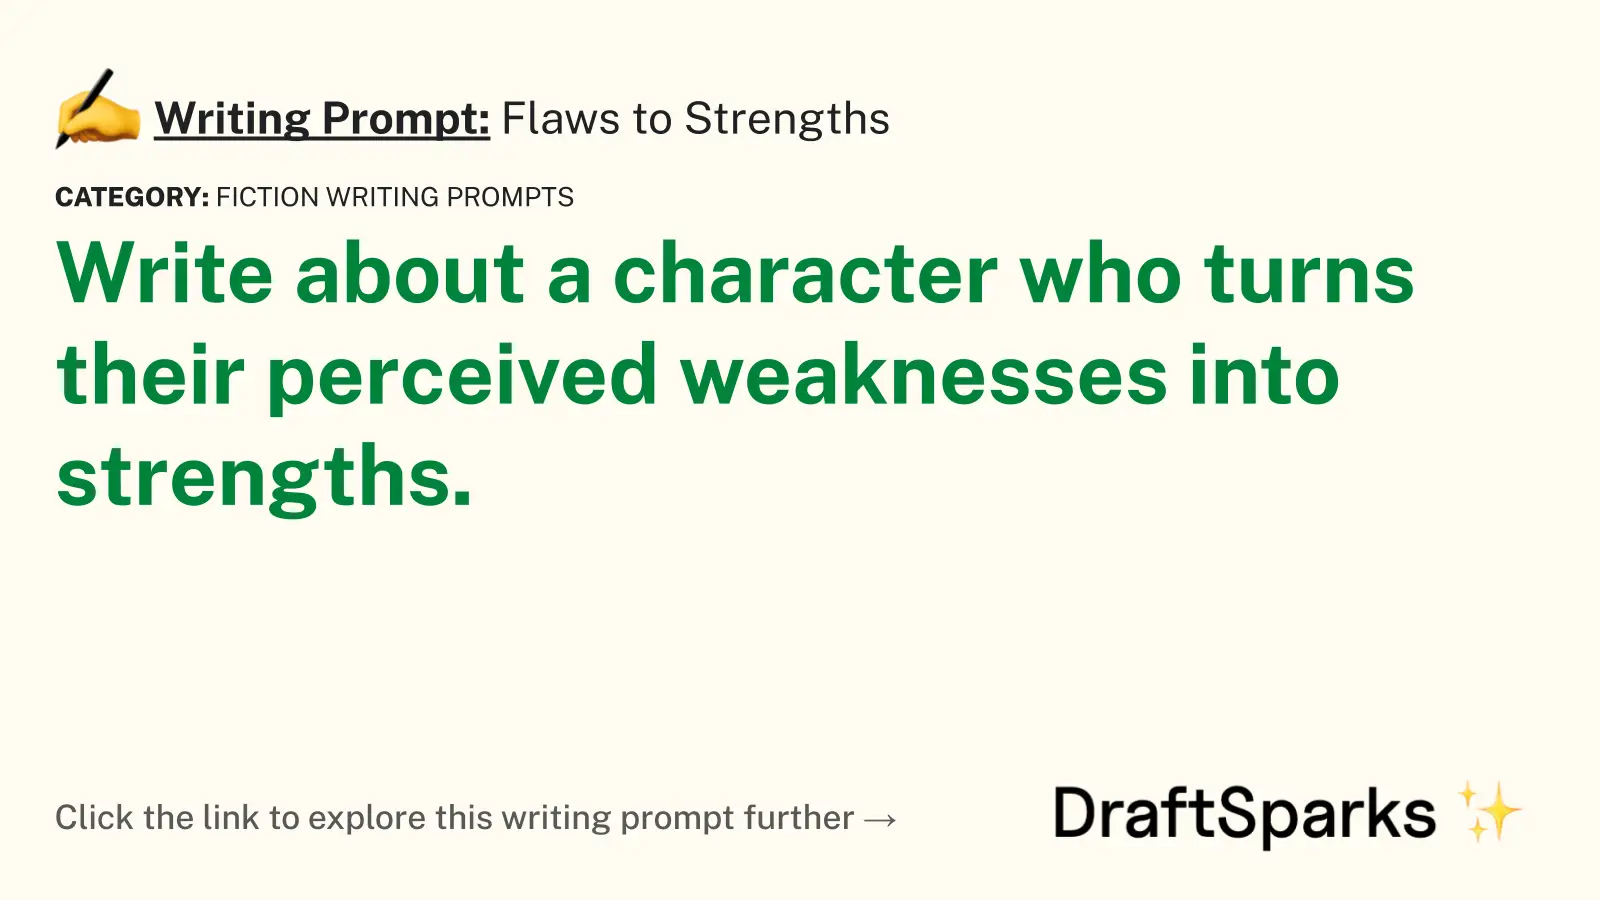 Flaws to Strengths